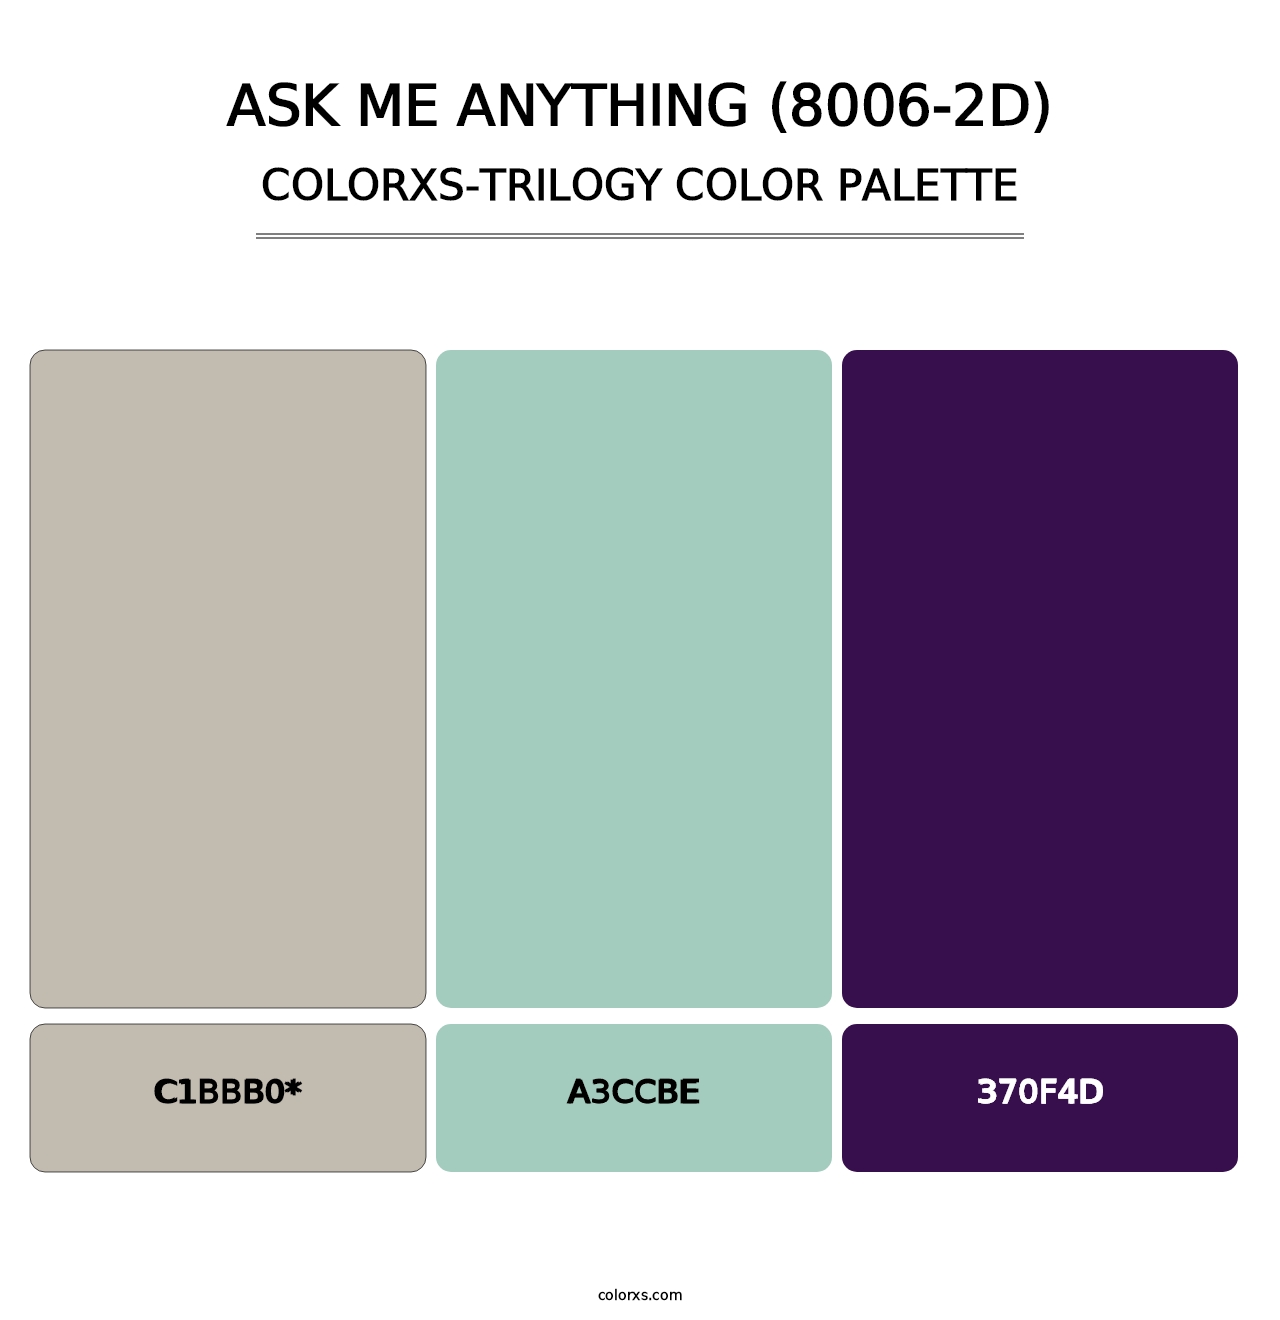 Ask Me Anything (8006-2D) - Colorxs Trilogy Palette